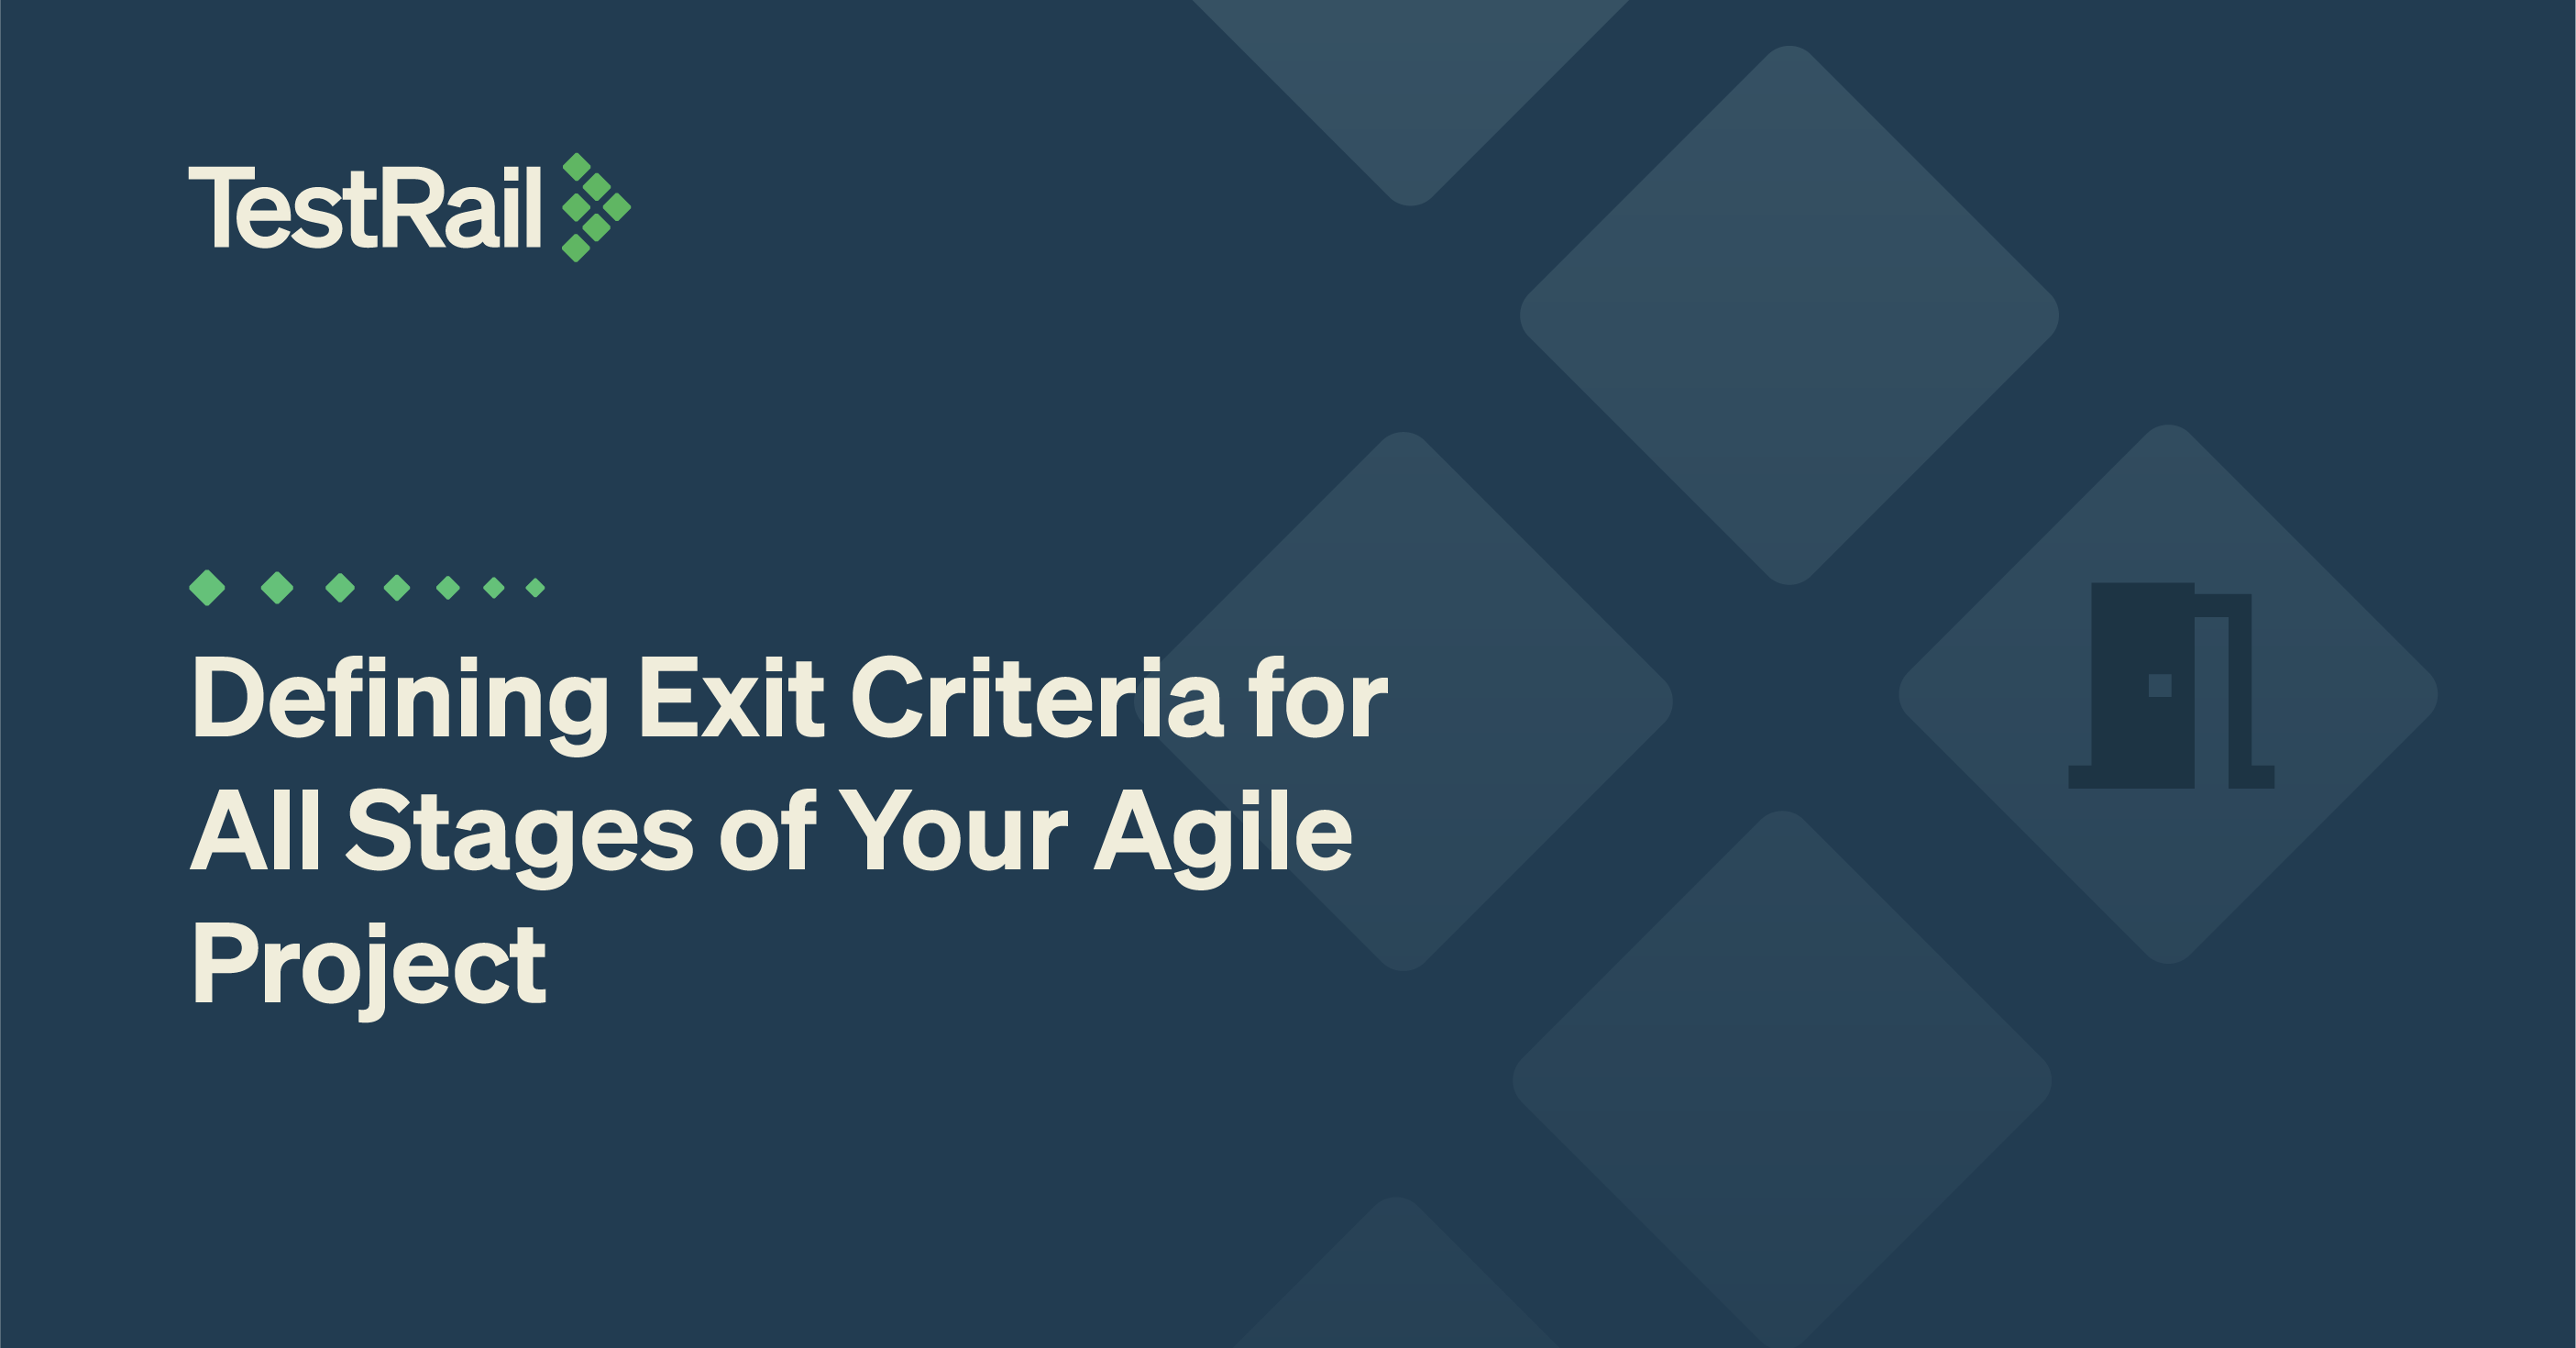 Defining Exit Criteria for All Stages of Your Agile Project